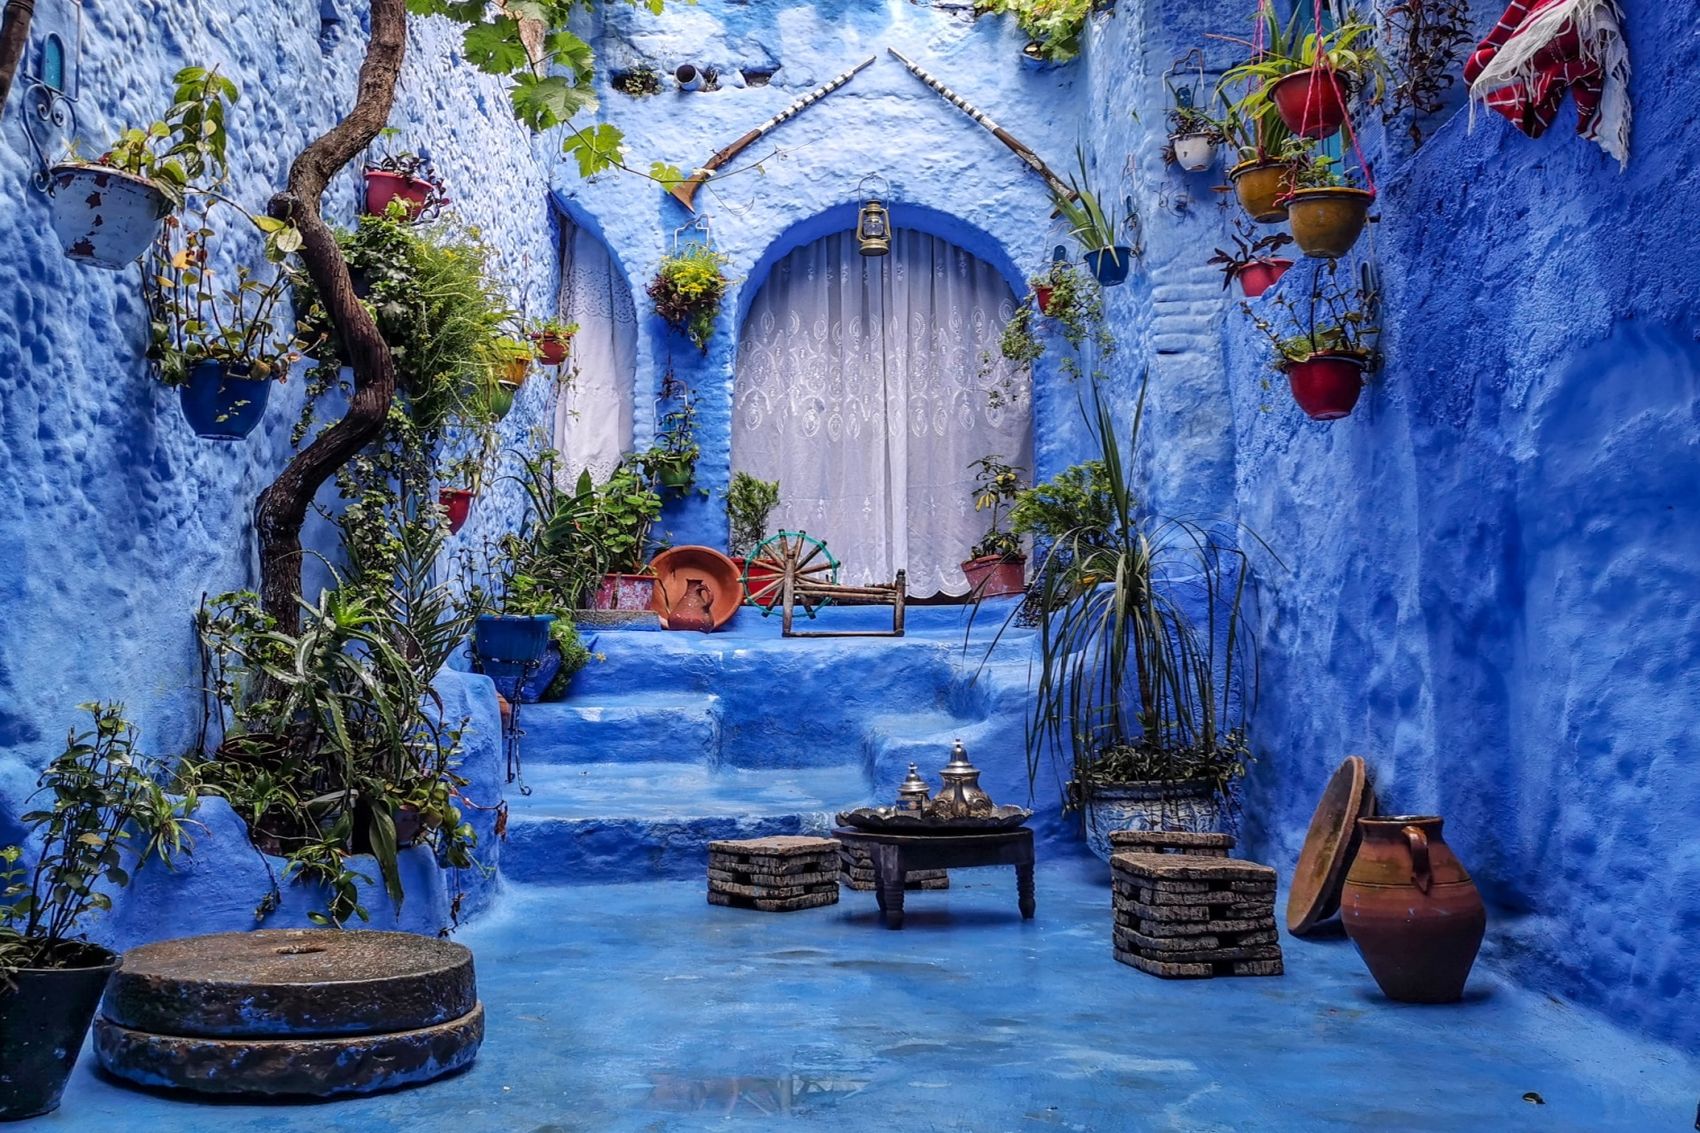 Blue house in Morocco